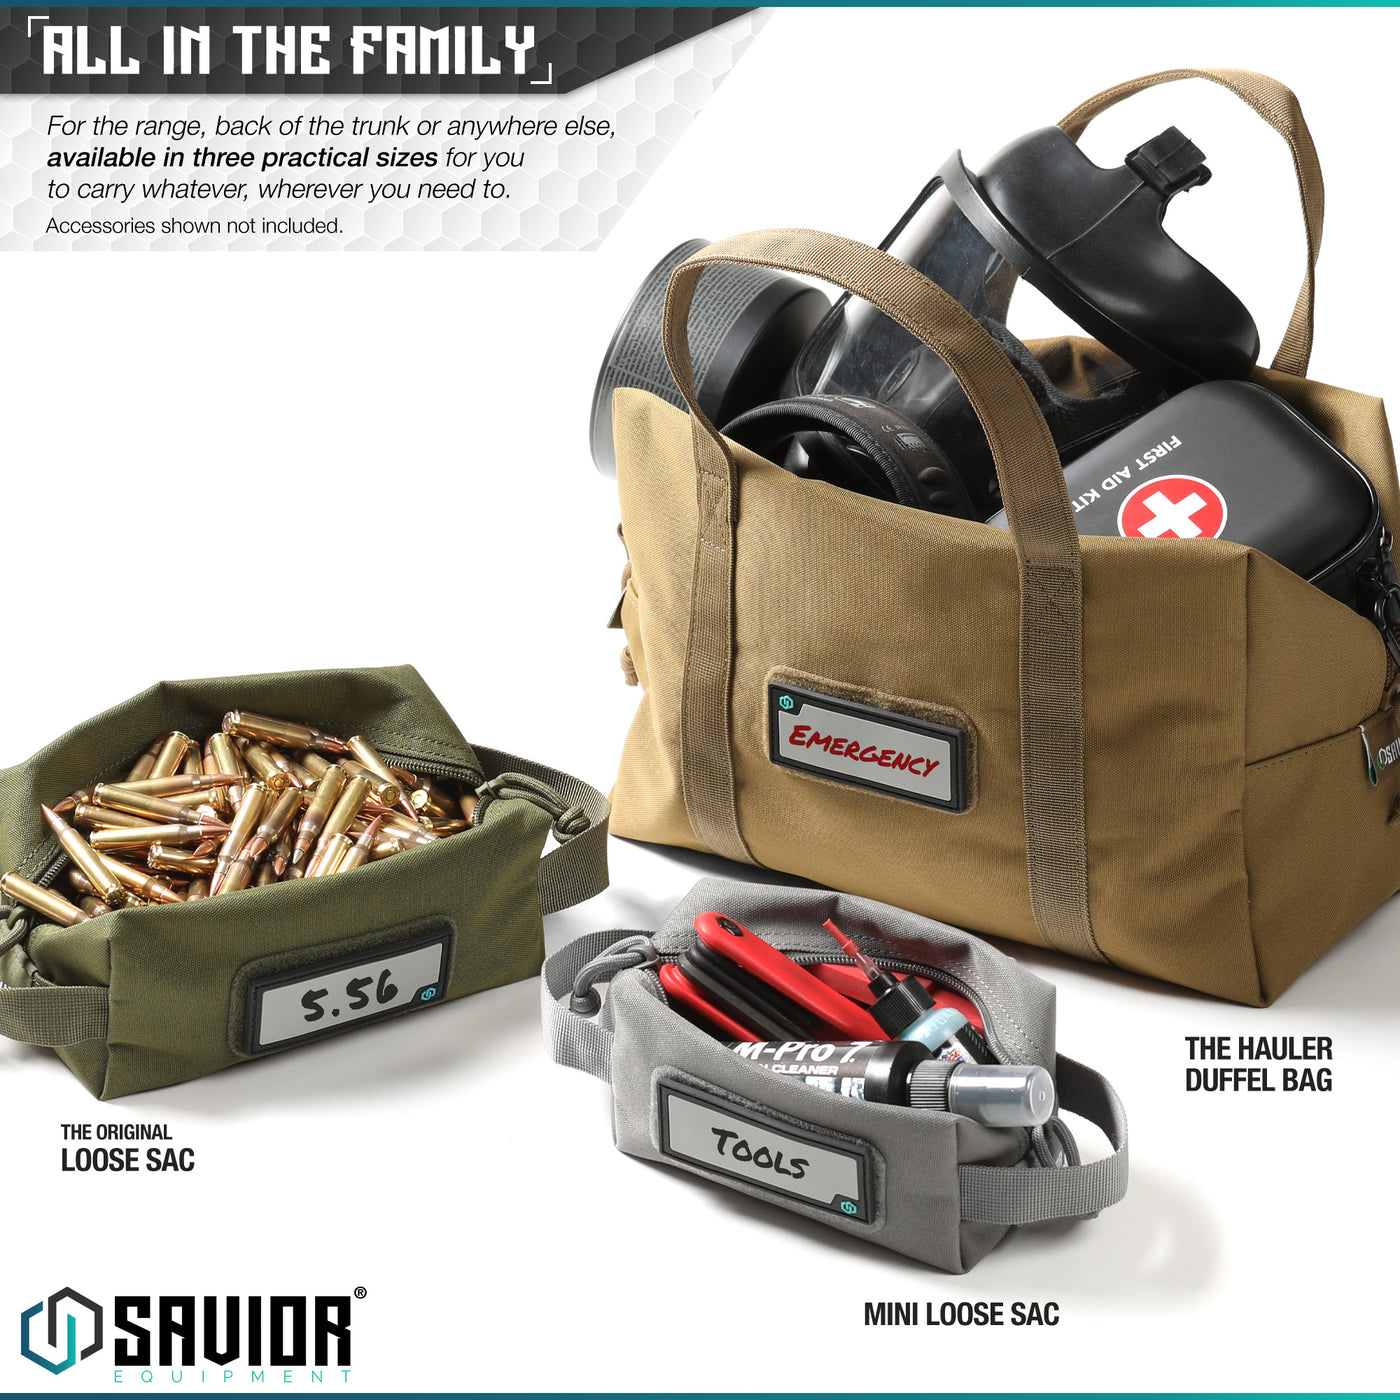 All In The Family - For the range, back of the trunk or anywhere else, available in three practical sizes for you to carry whatever, wherever you need to. Accessories shown not included.